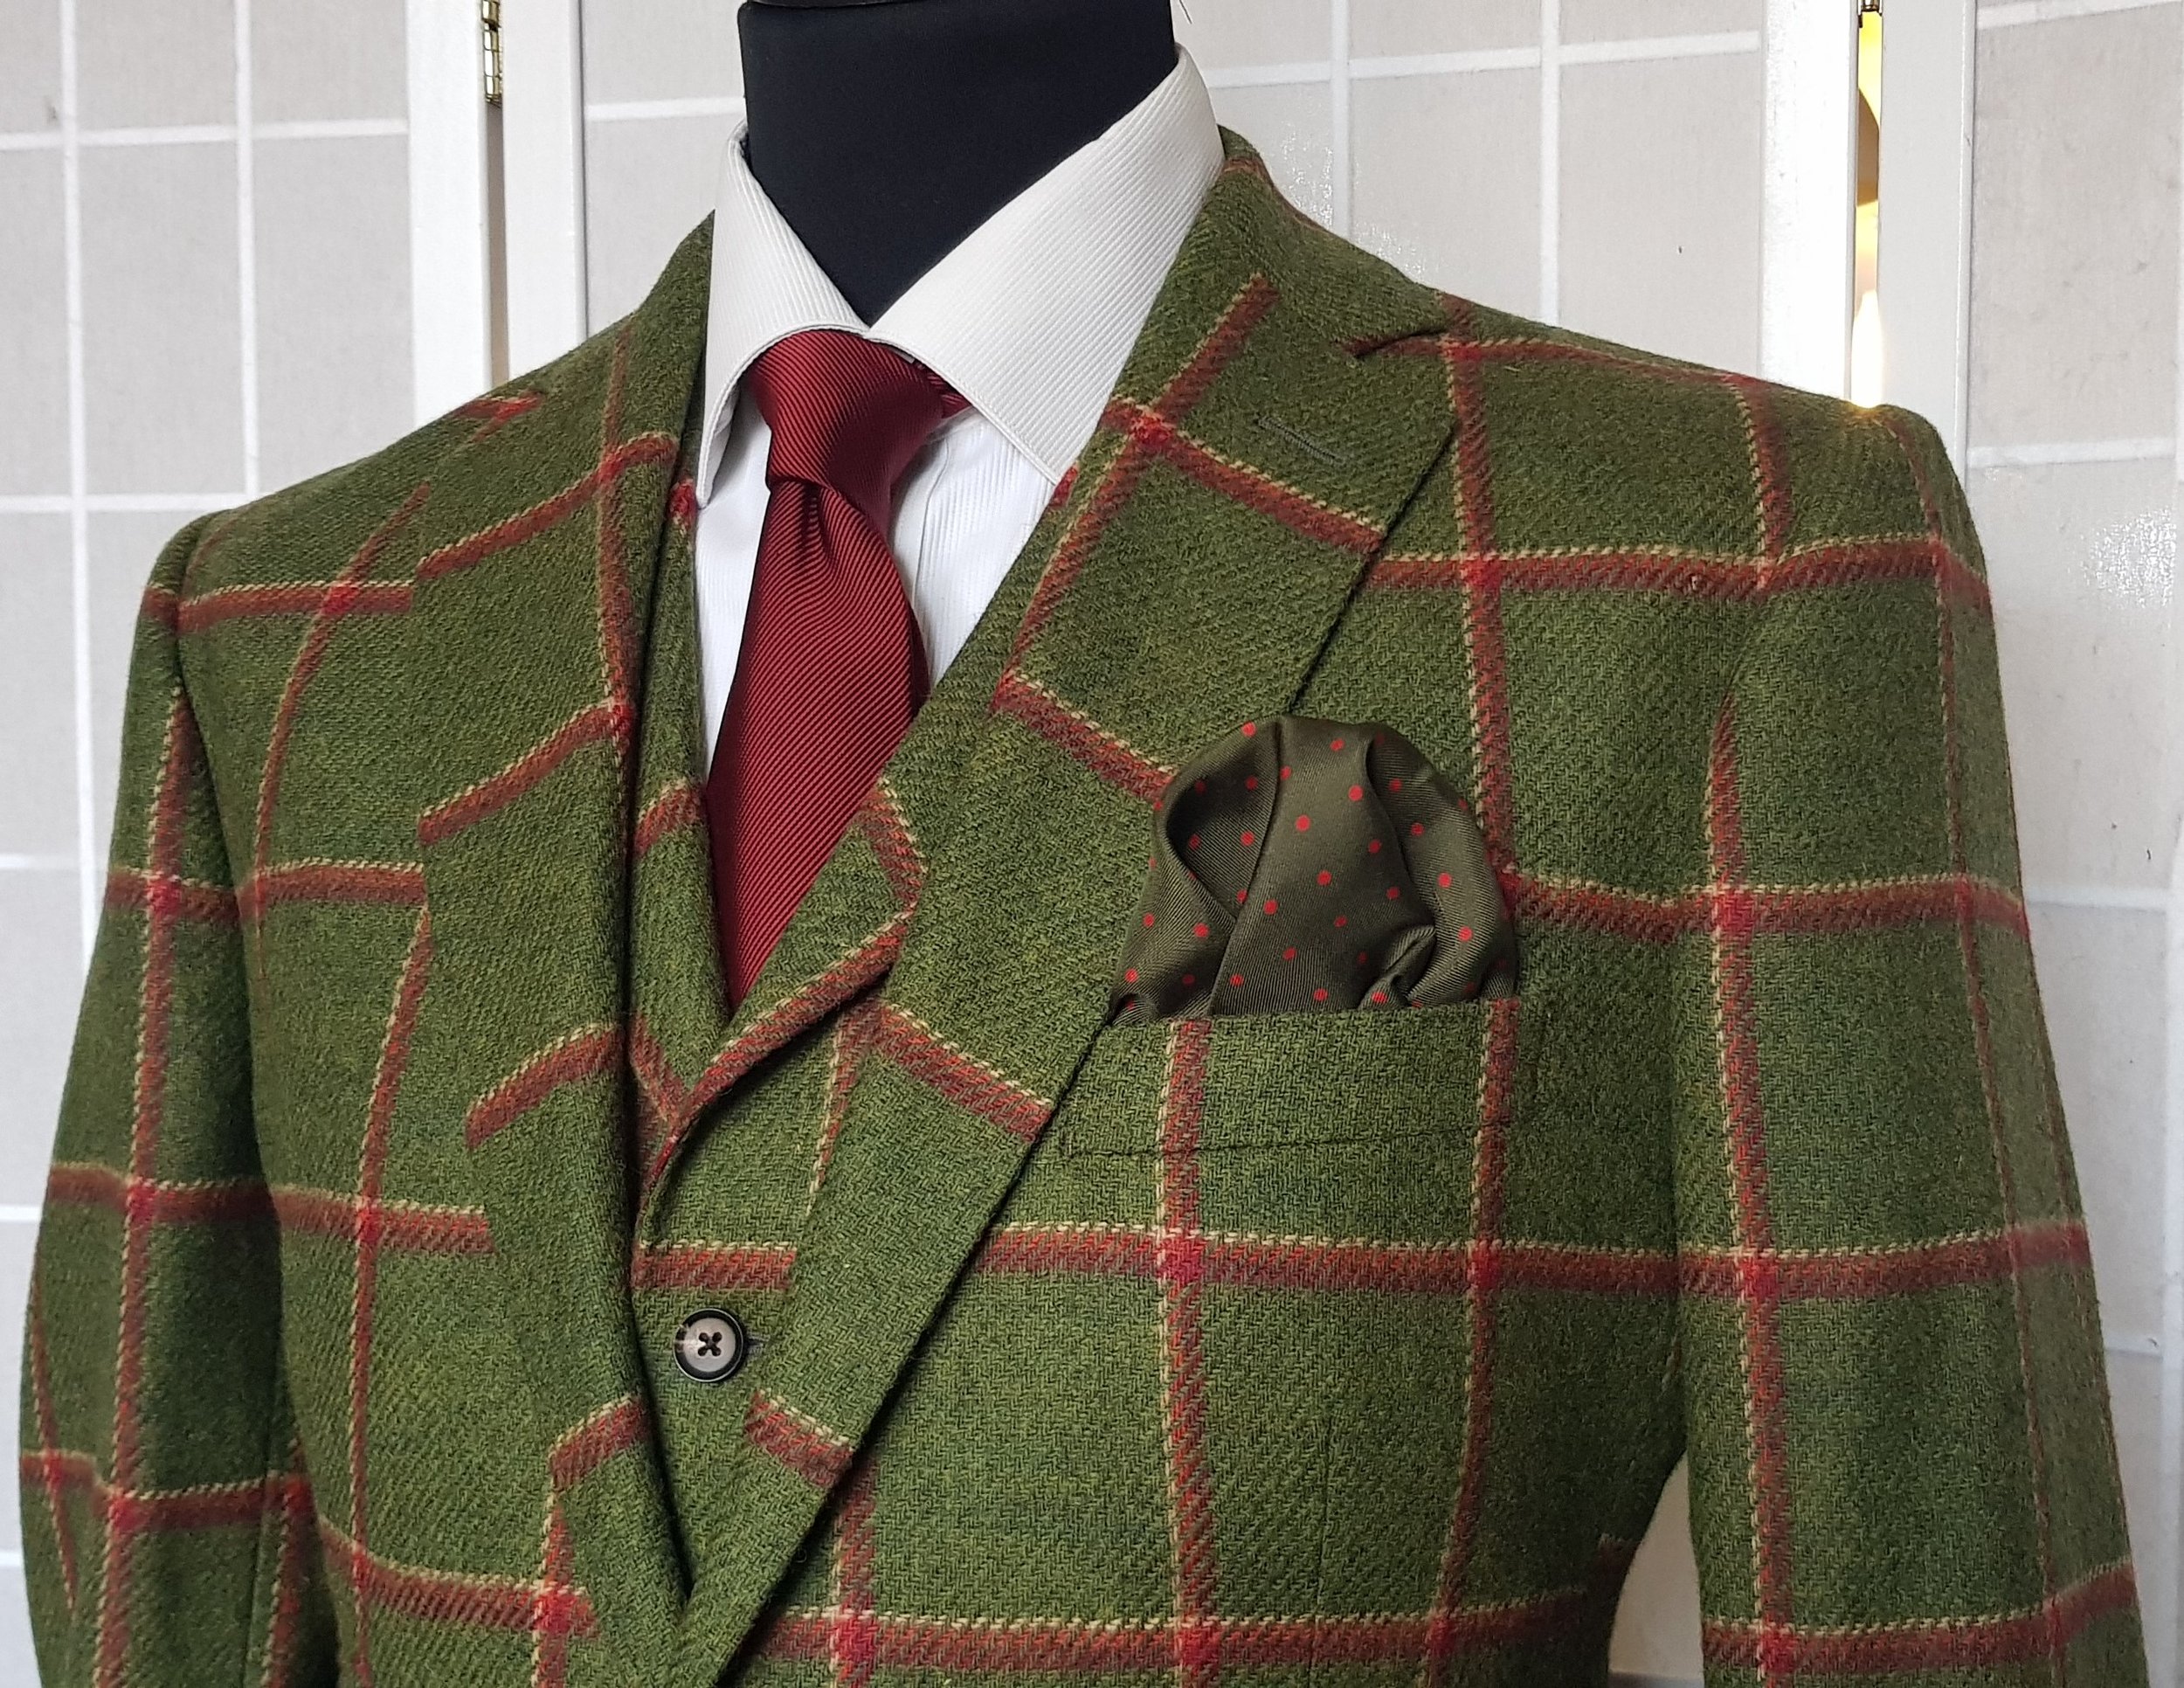 3 piece suit in red and green tweed (5).jpg